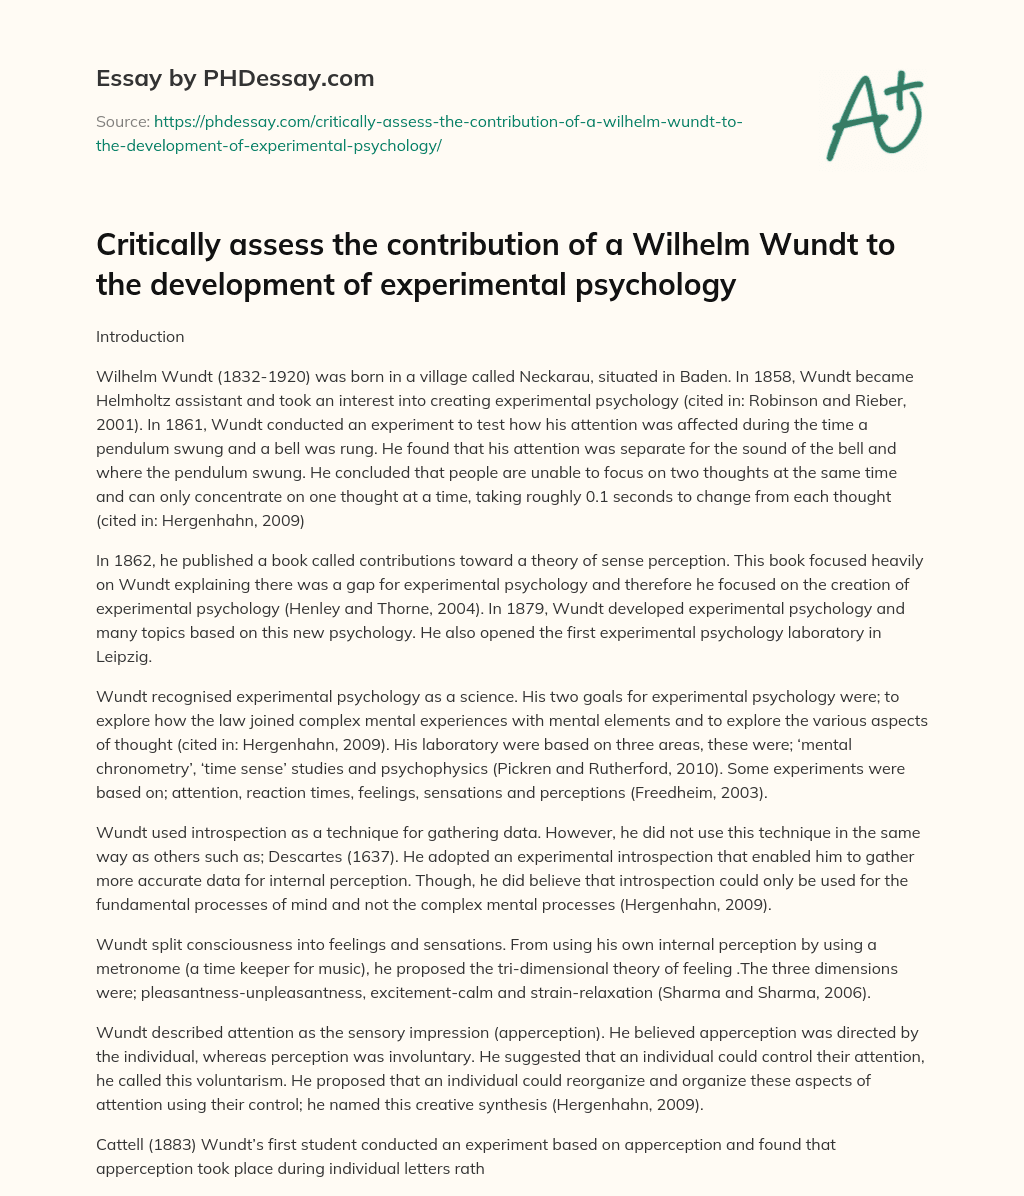 Critically assess the contribution of a Wilhelm Wundt to the development of experimental psychology essay